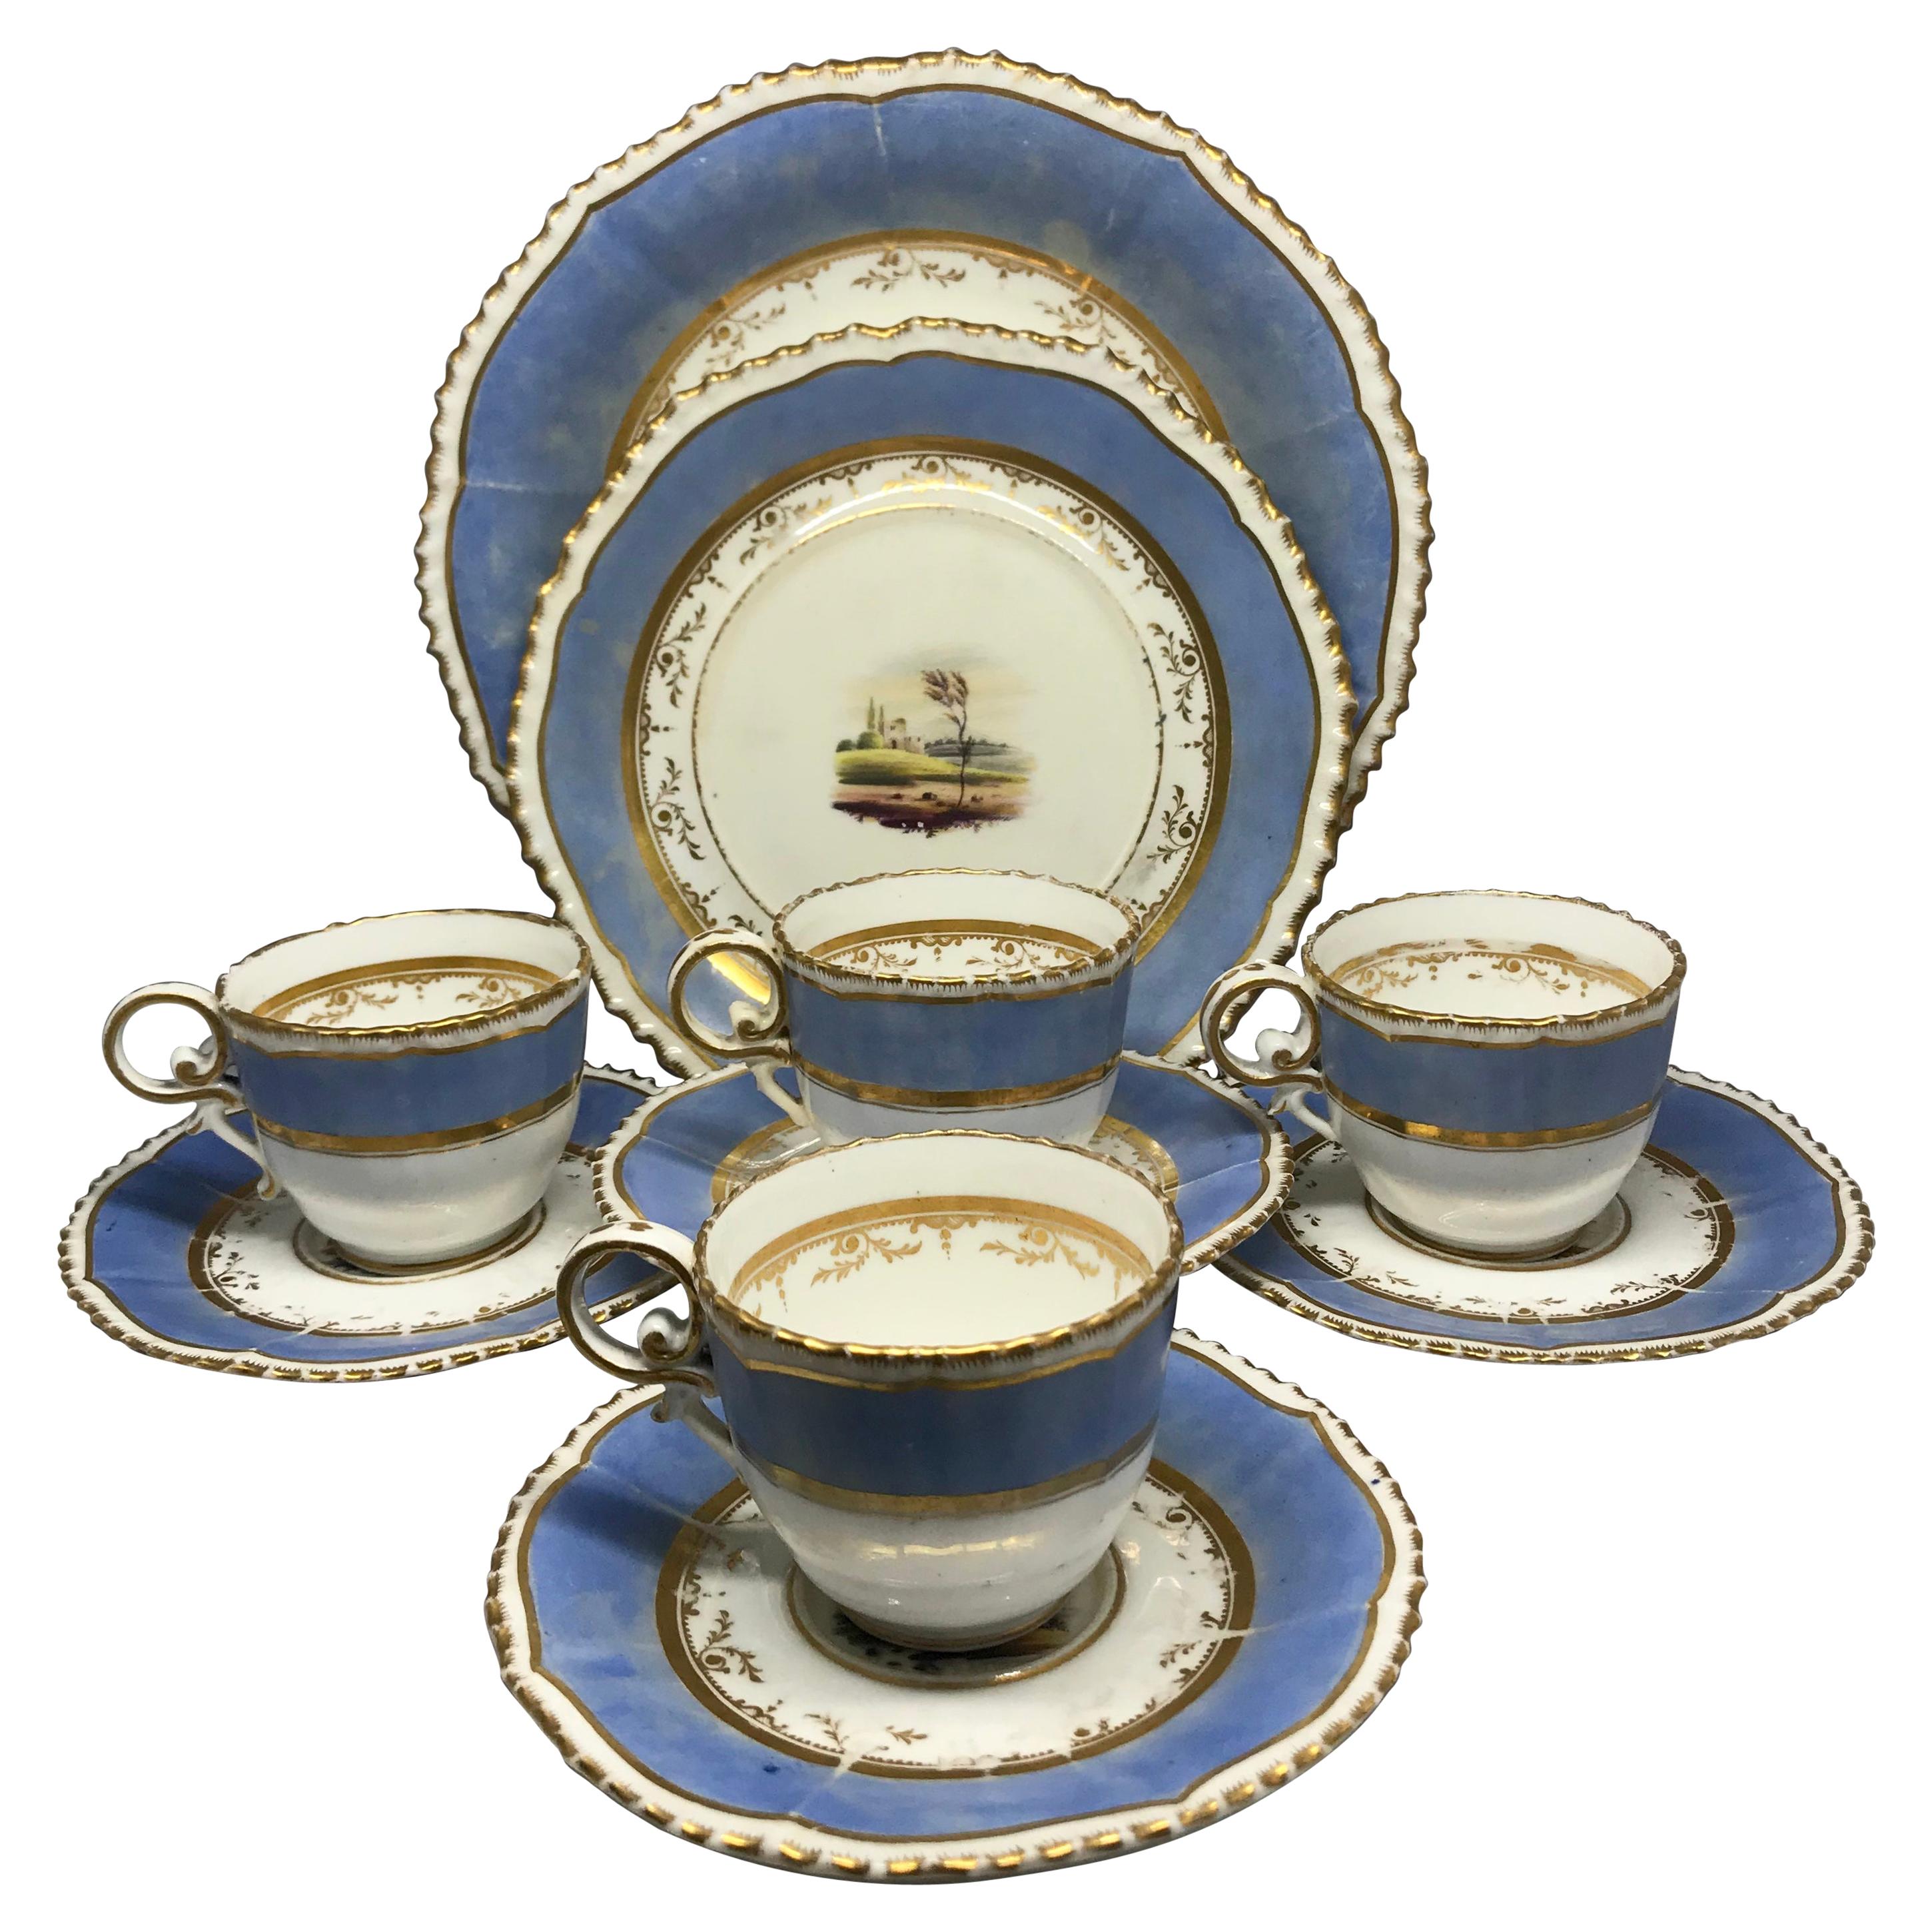 Set of Four Blue and Gilt Painted English Scenes Coffee Cups